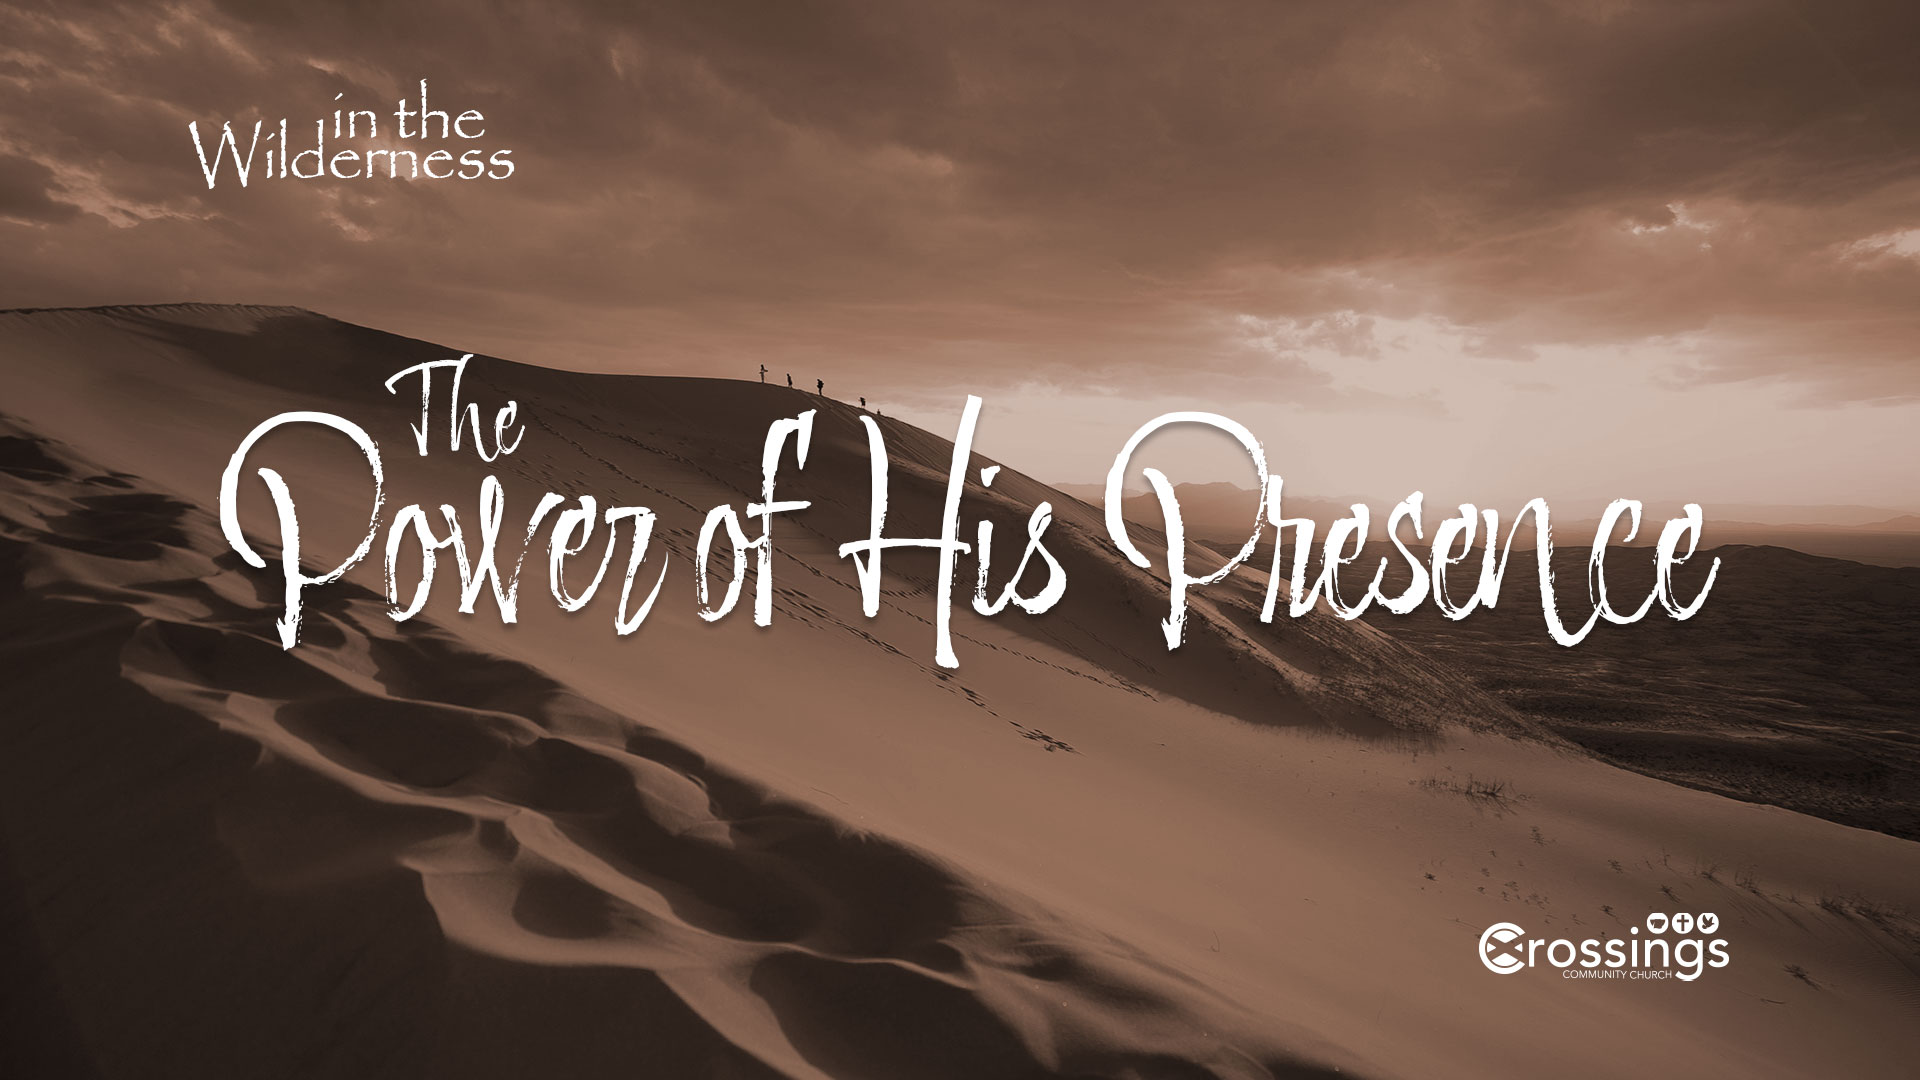 The Power of God's Presence